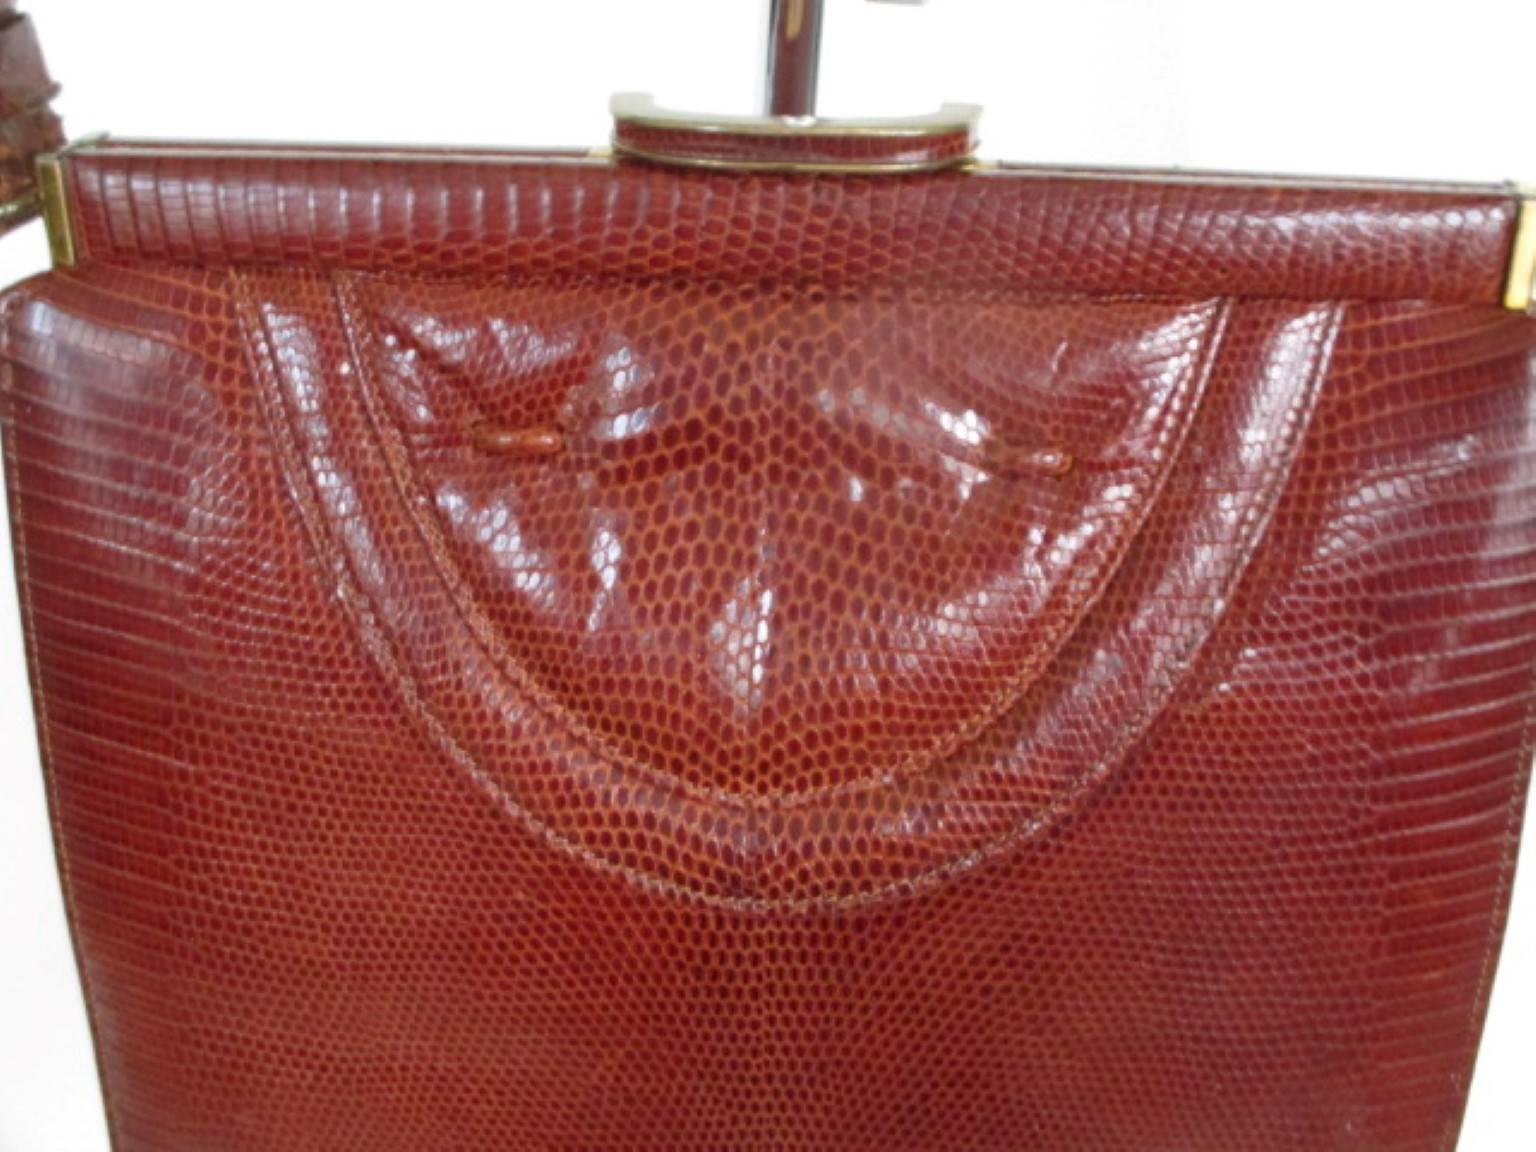 vintage Lizard bag -collectors item-
orange brown color
Gold hardware
Inside is made of soft suède leather with pockets
Condition is fair with minor wear at the gold hardware, handles and leather.
Measurements:
H 23 cm x 22 cm x 8 cm
9.05 inch x